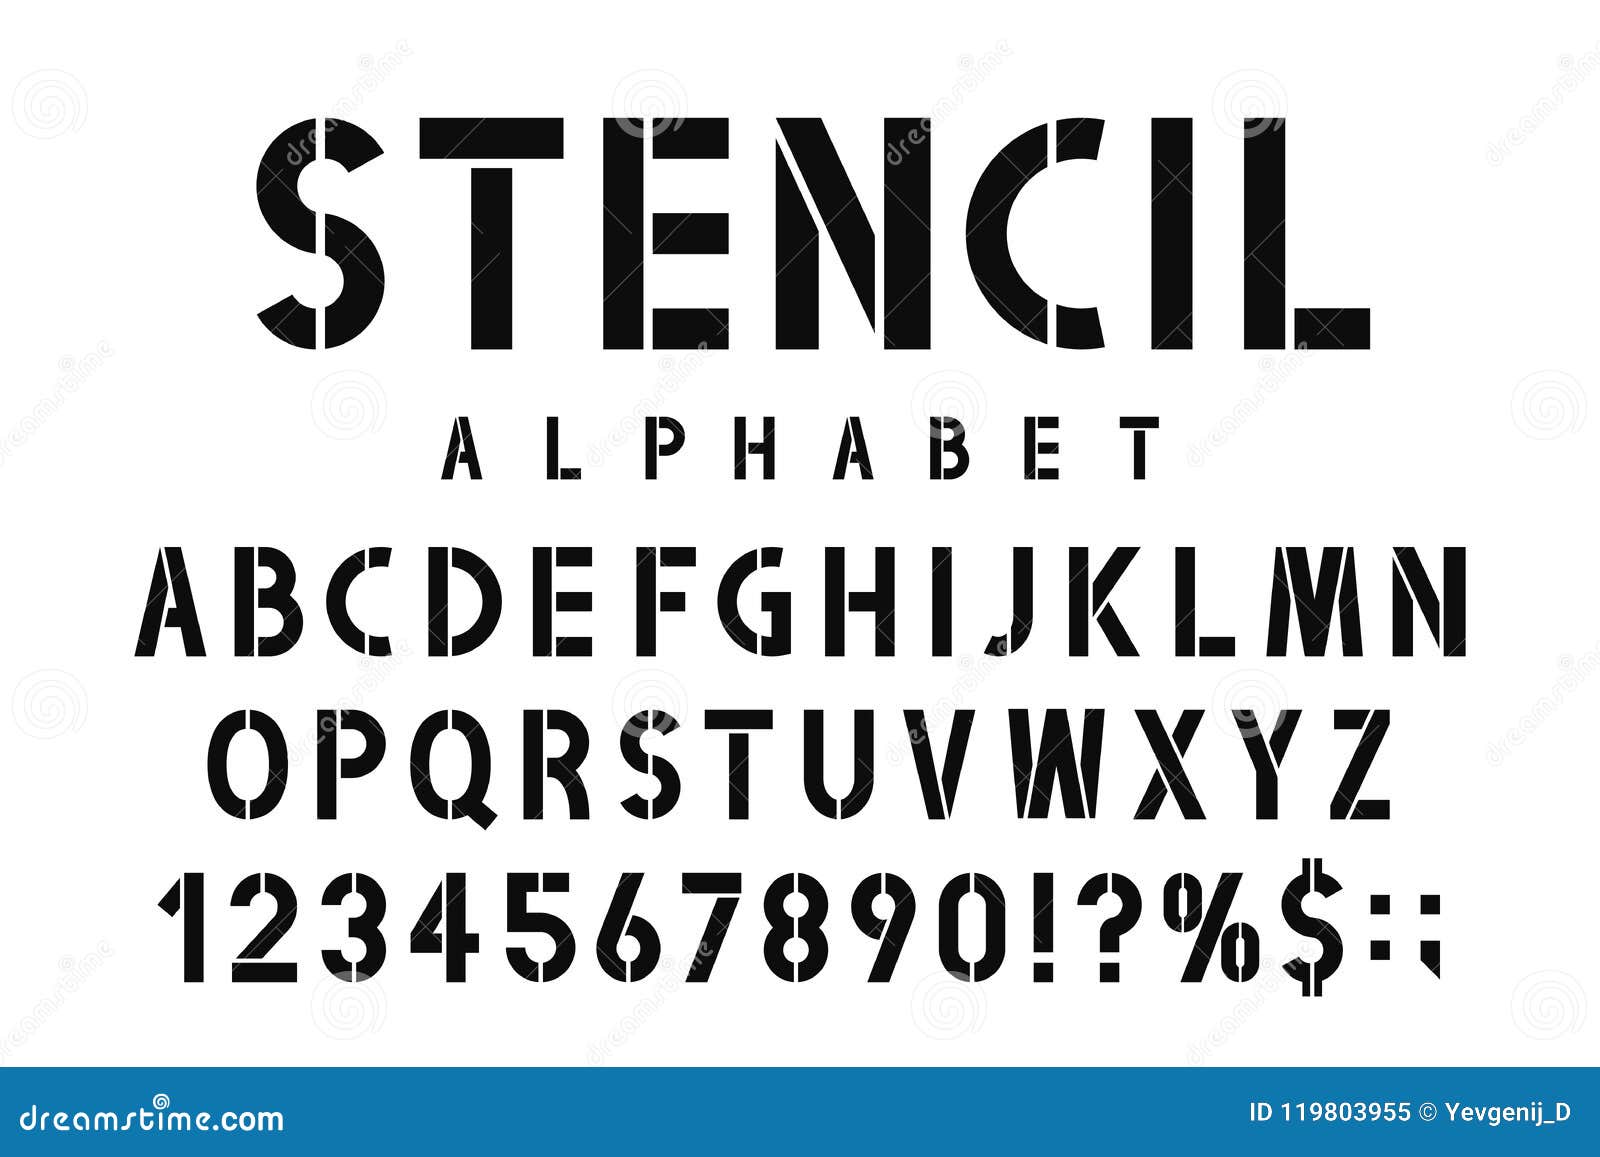 military stencil font. stencil alphabet with numbers in retro army style. vintage and urban font for stencil-plate